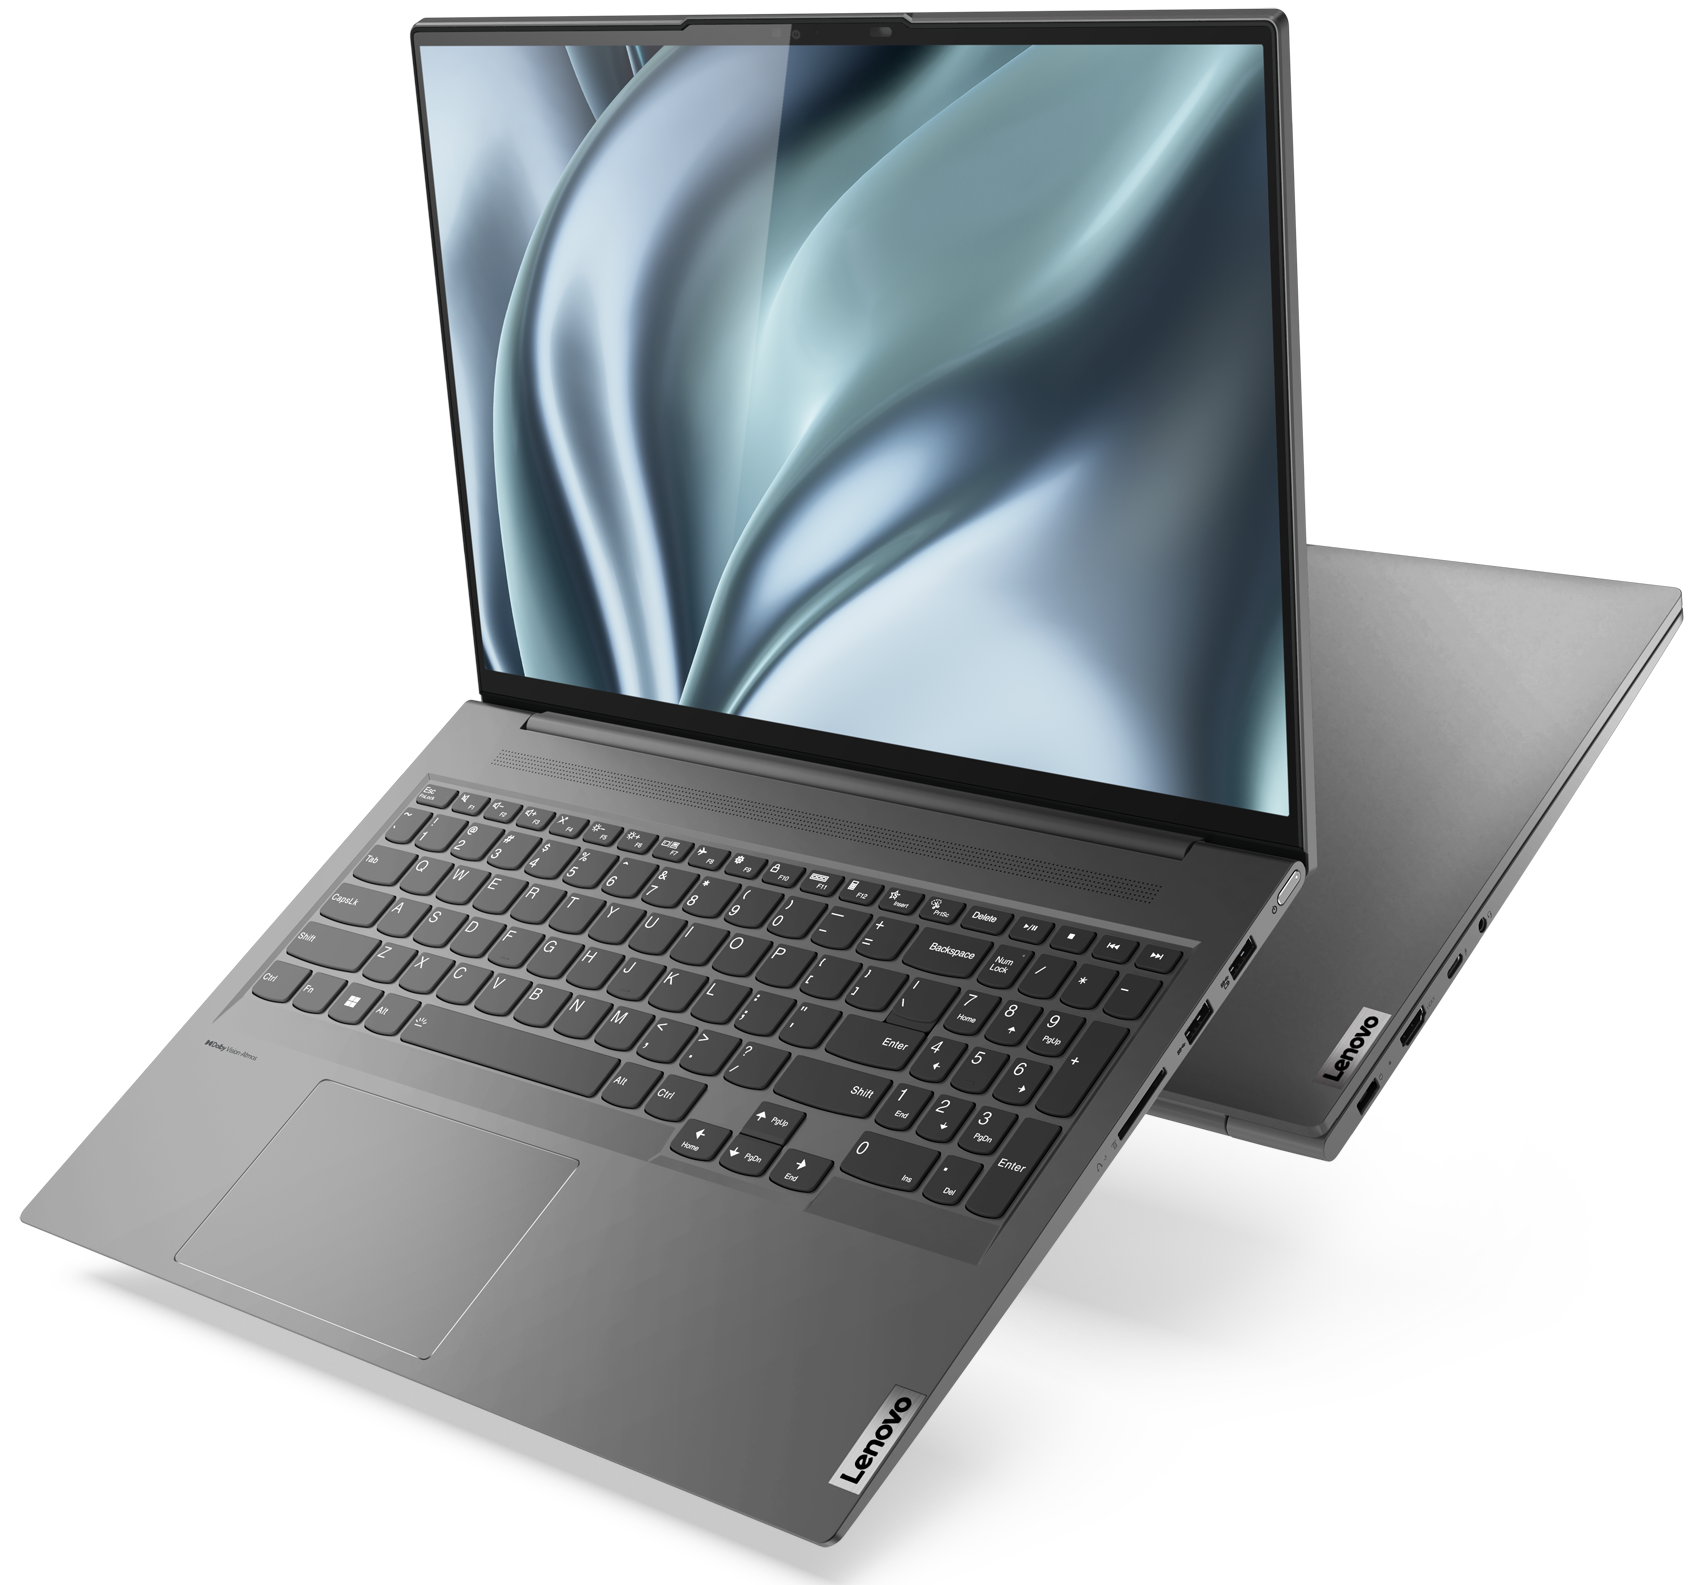  Lenovo’s new range of Yoga and Legion laptops are fueled with the power to Create & Play